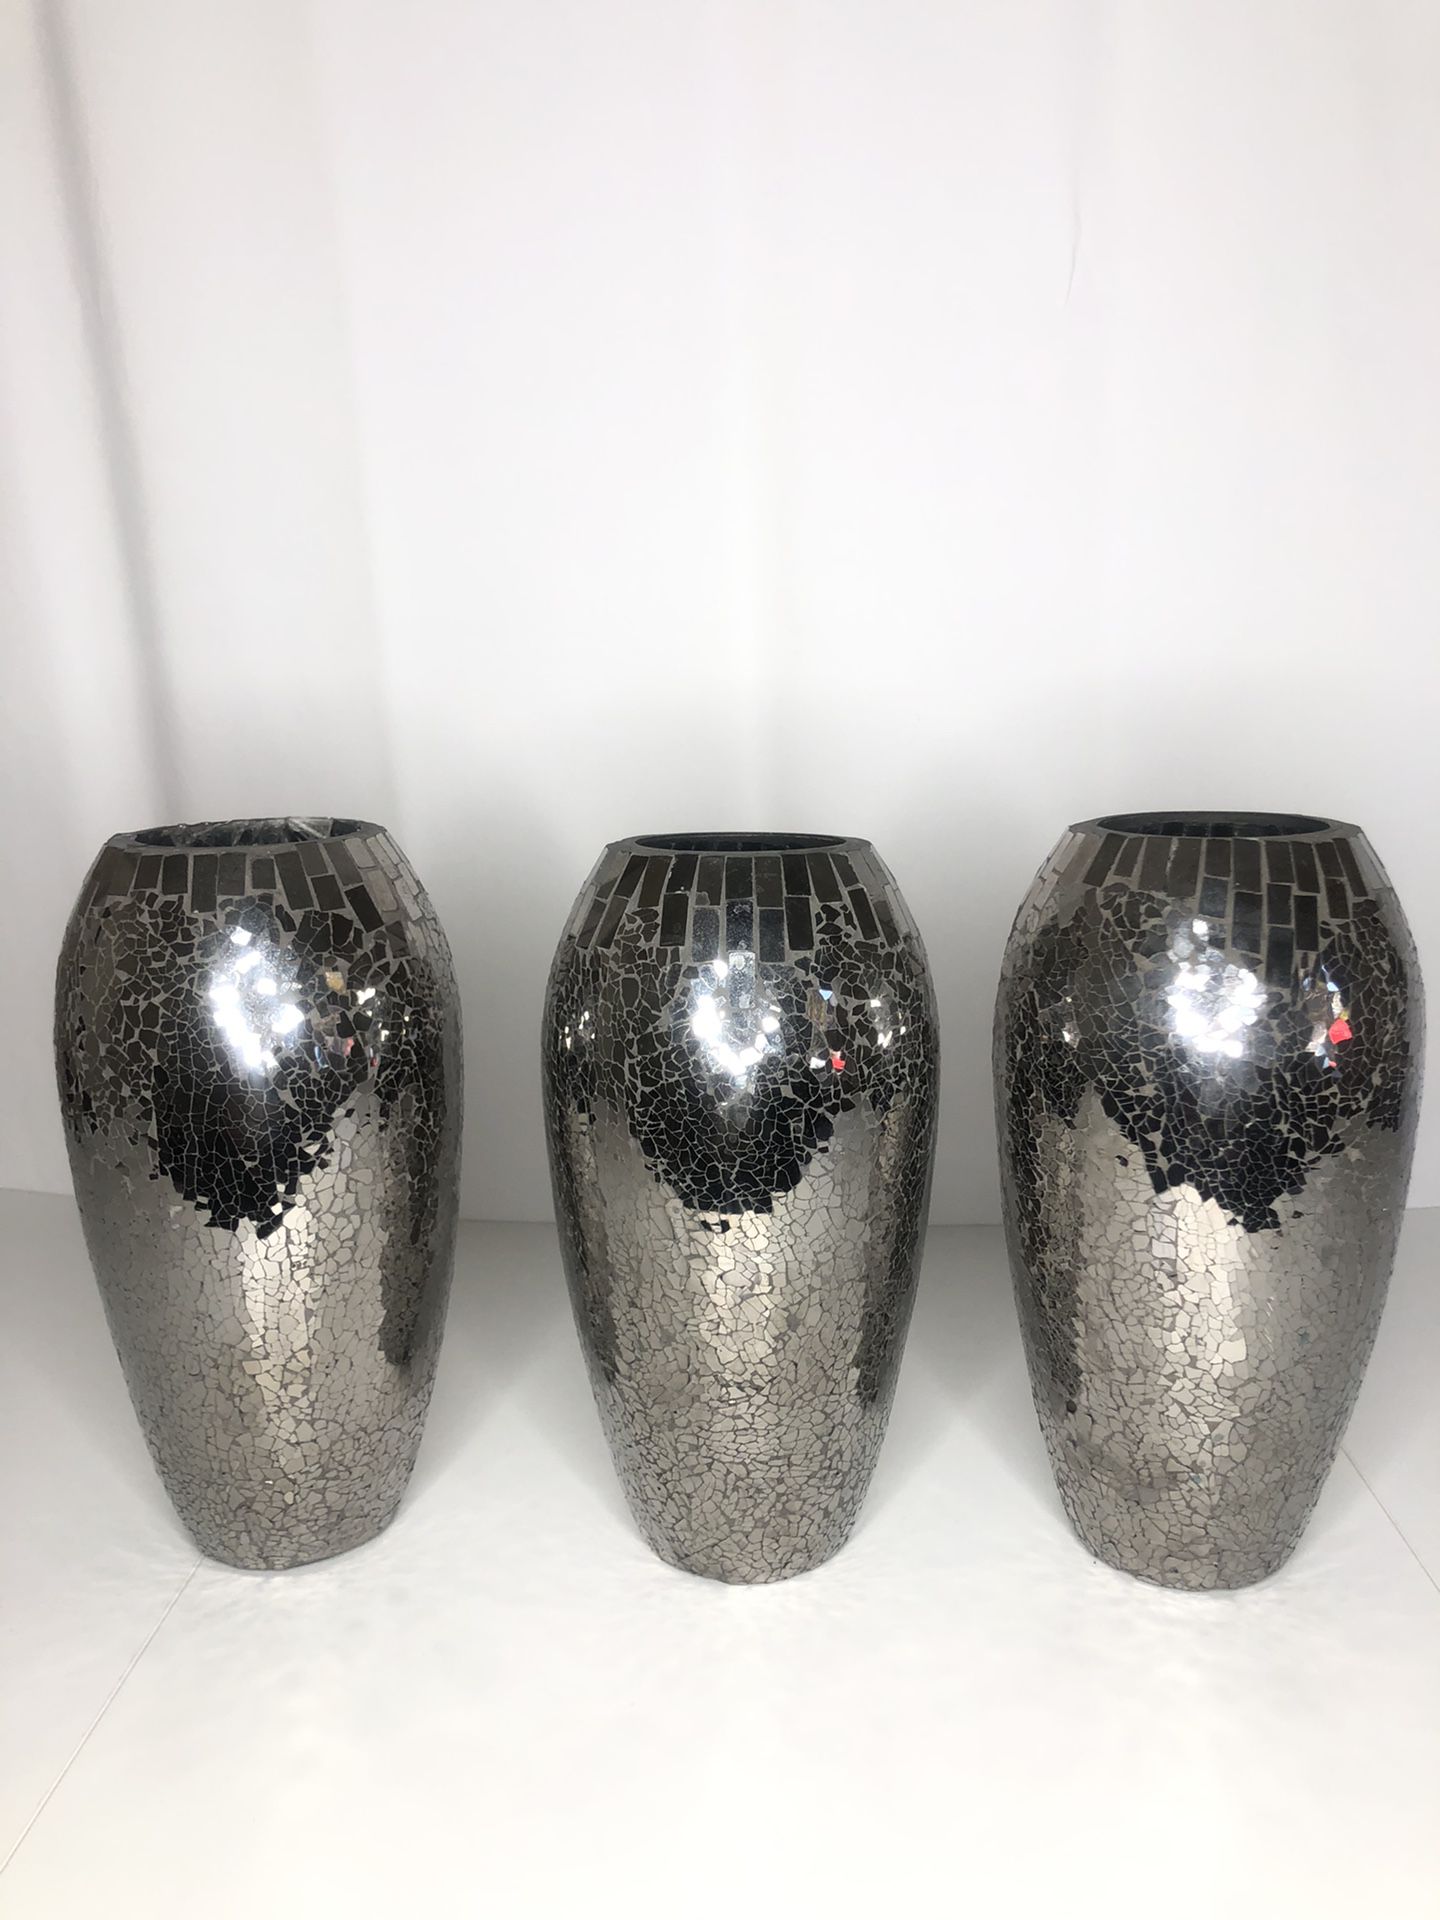 3-12inch tall vases with mirrored glass on outside. All in great condition.